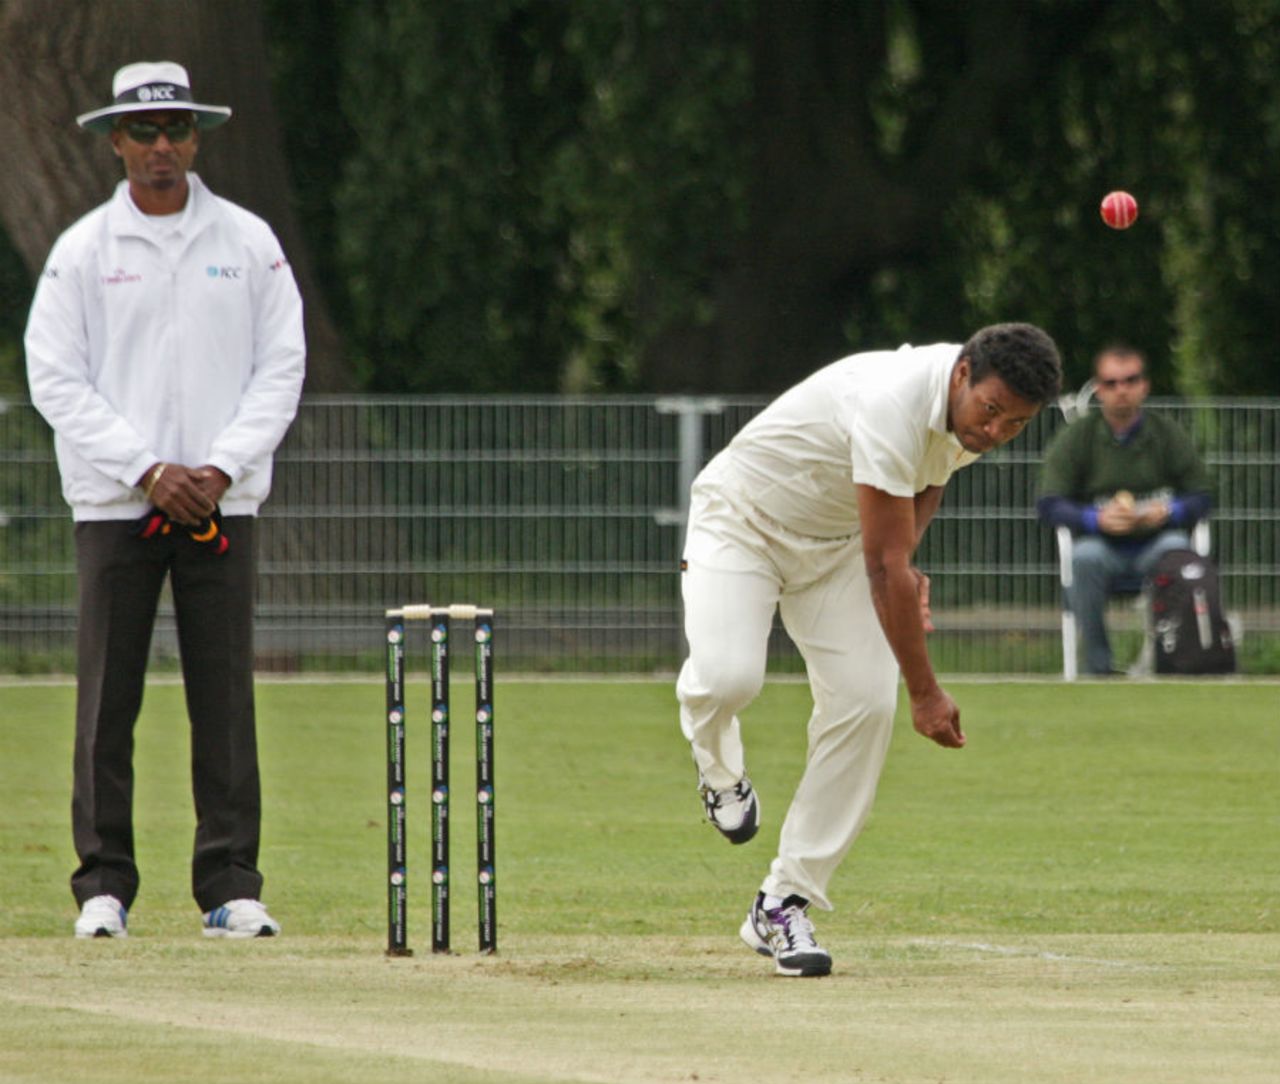 Loa Nou picked up 5 for 49 in the first innings, Netherlands v Papua New Guinea, Intercontinental Cup, Amstelveen, 1st day, June 16, 2015